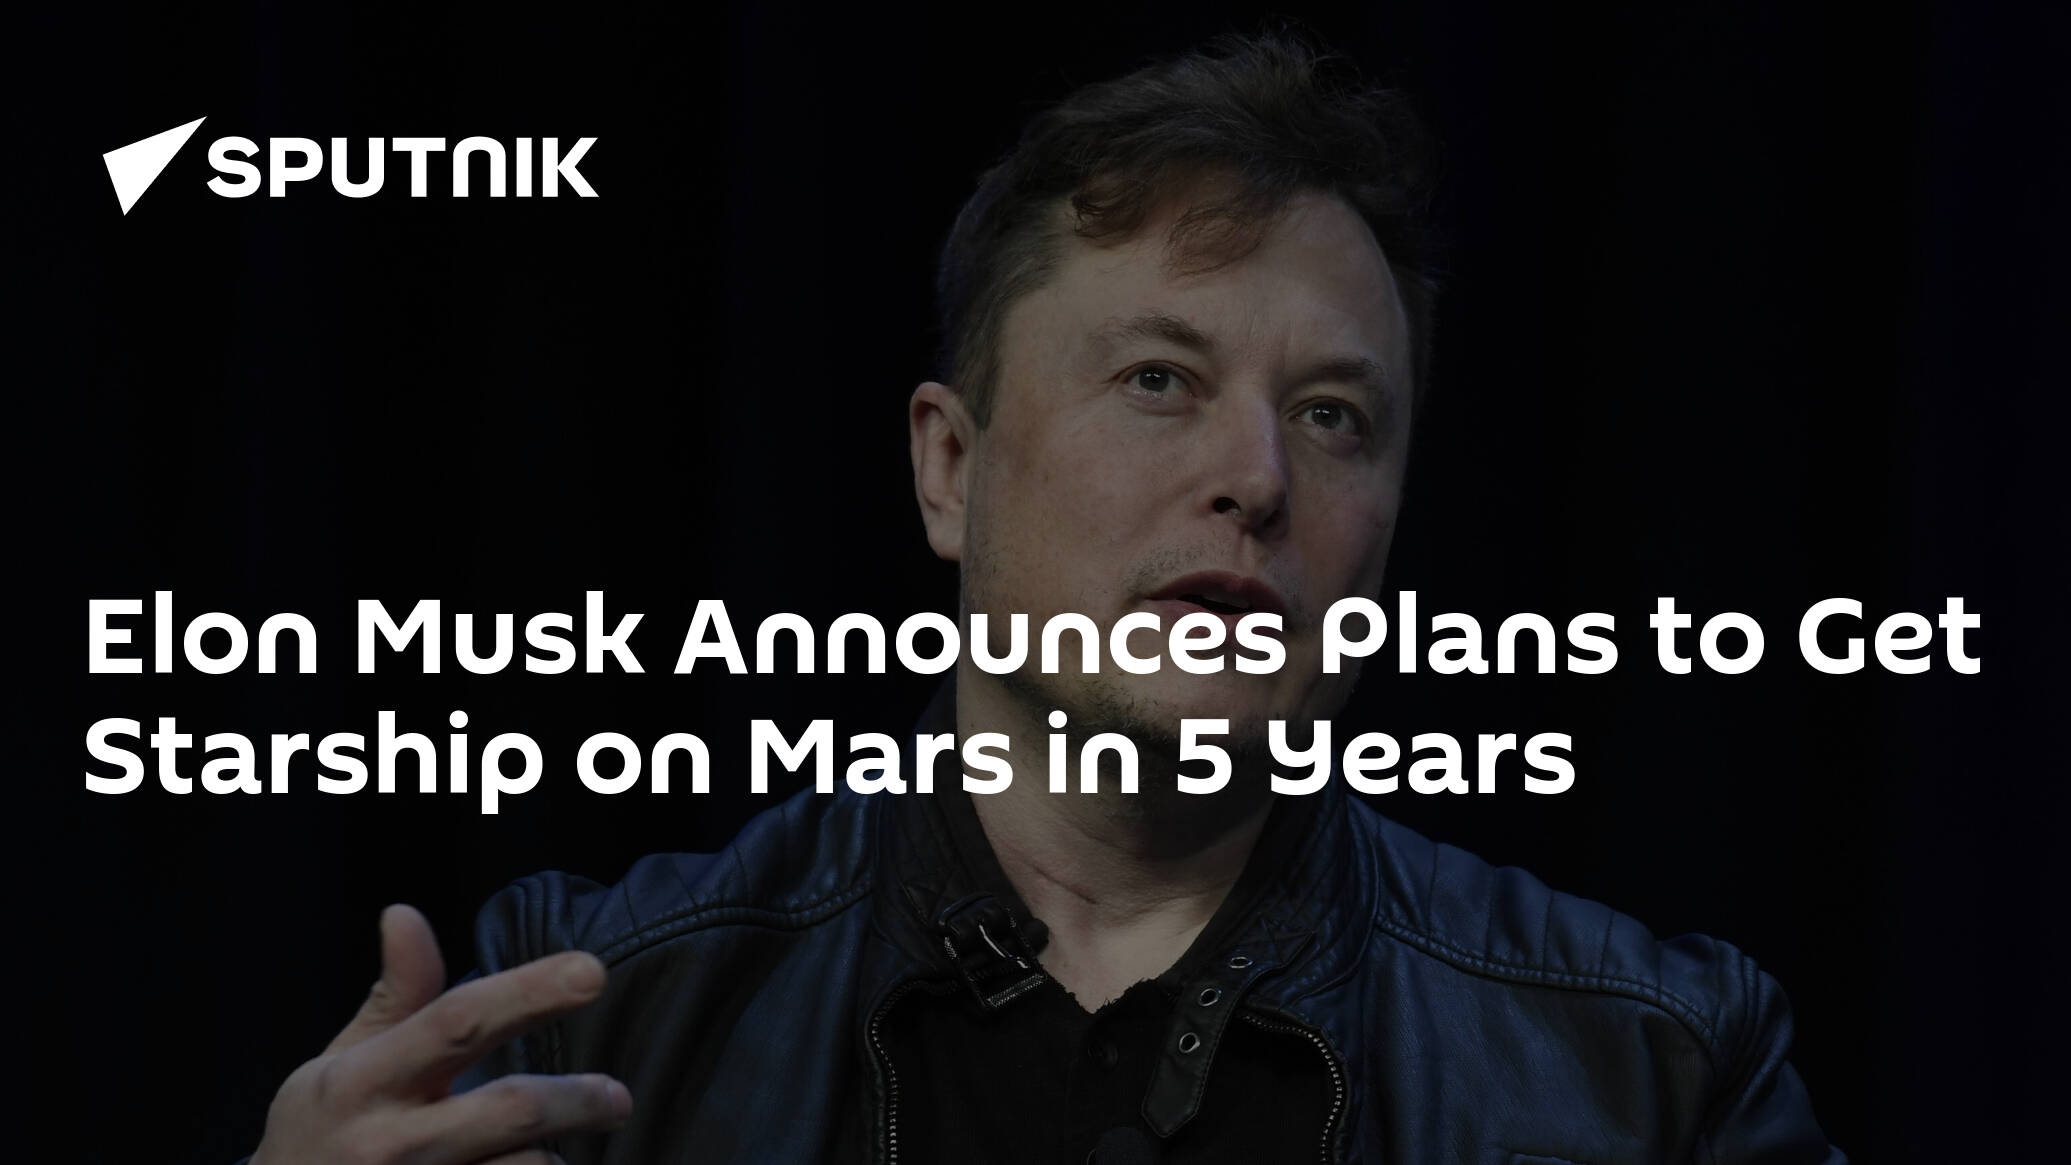 Elon Musk Announces Plans to Get Starship on Mars in 5 Years